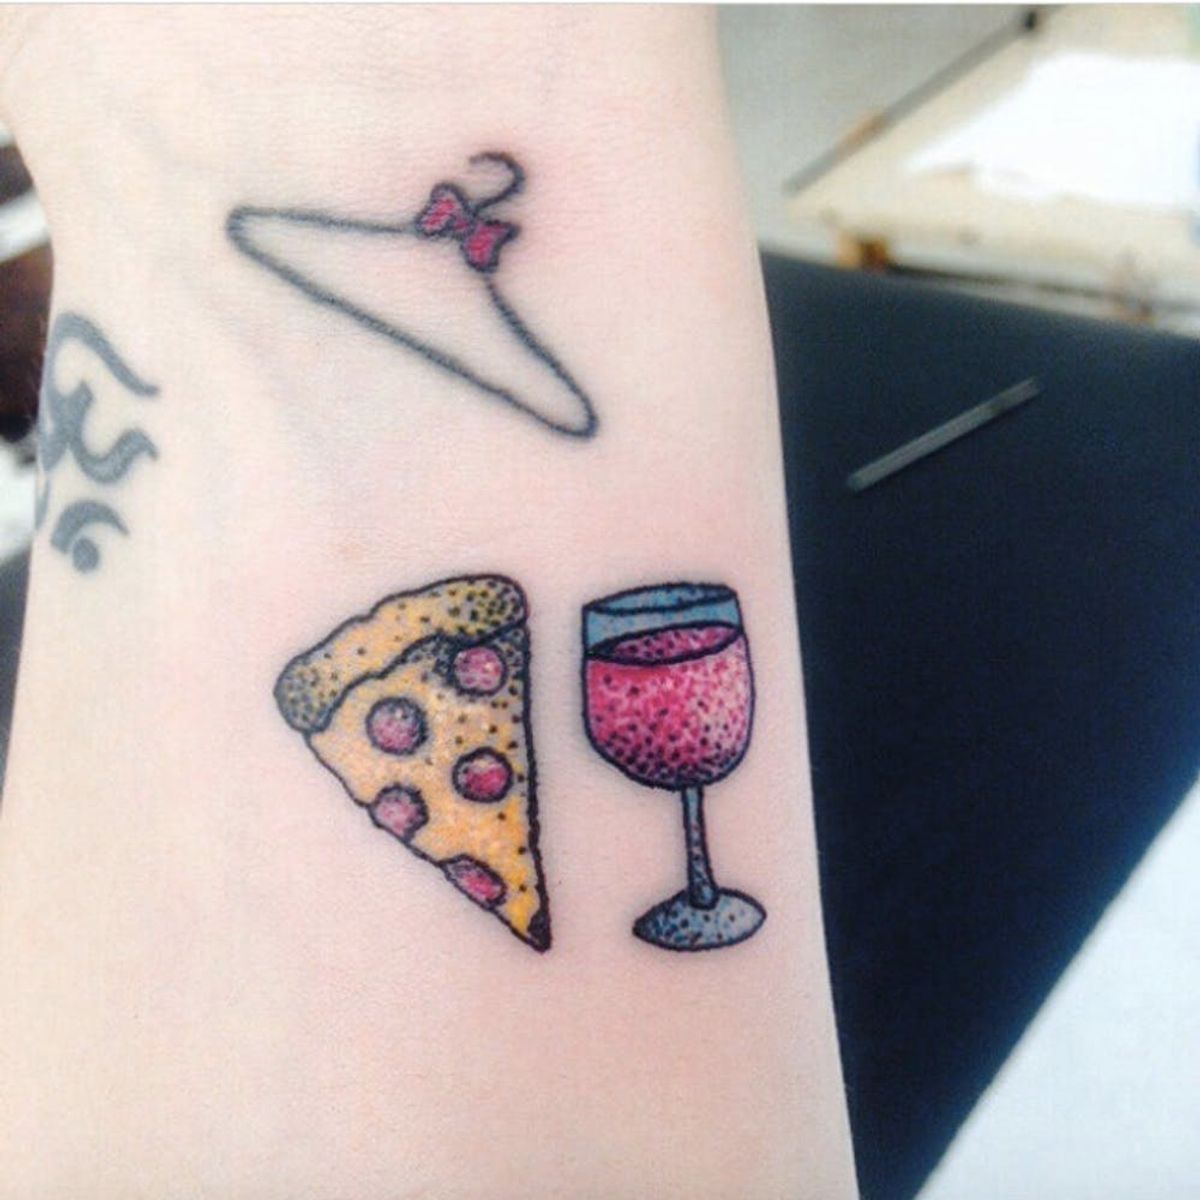 12 Wine Tattoos for the Vino-Obsessed Gal